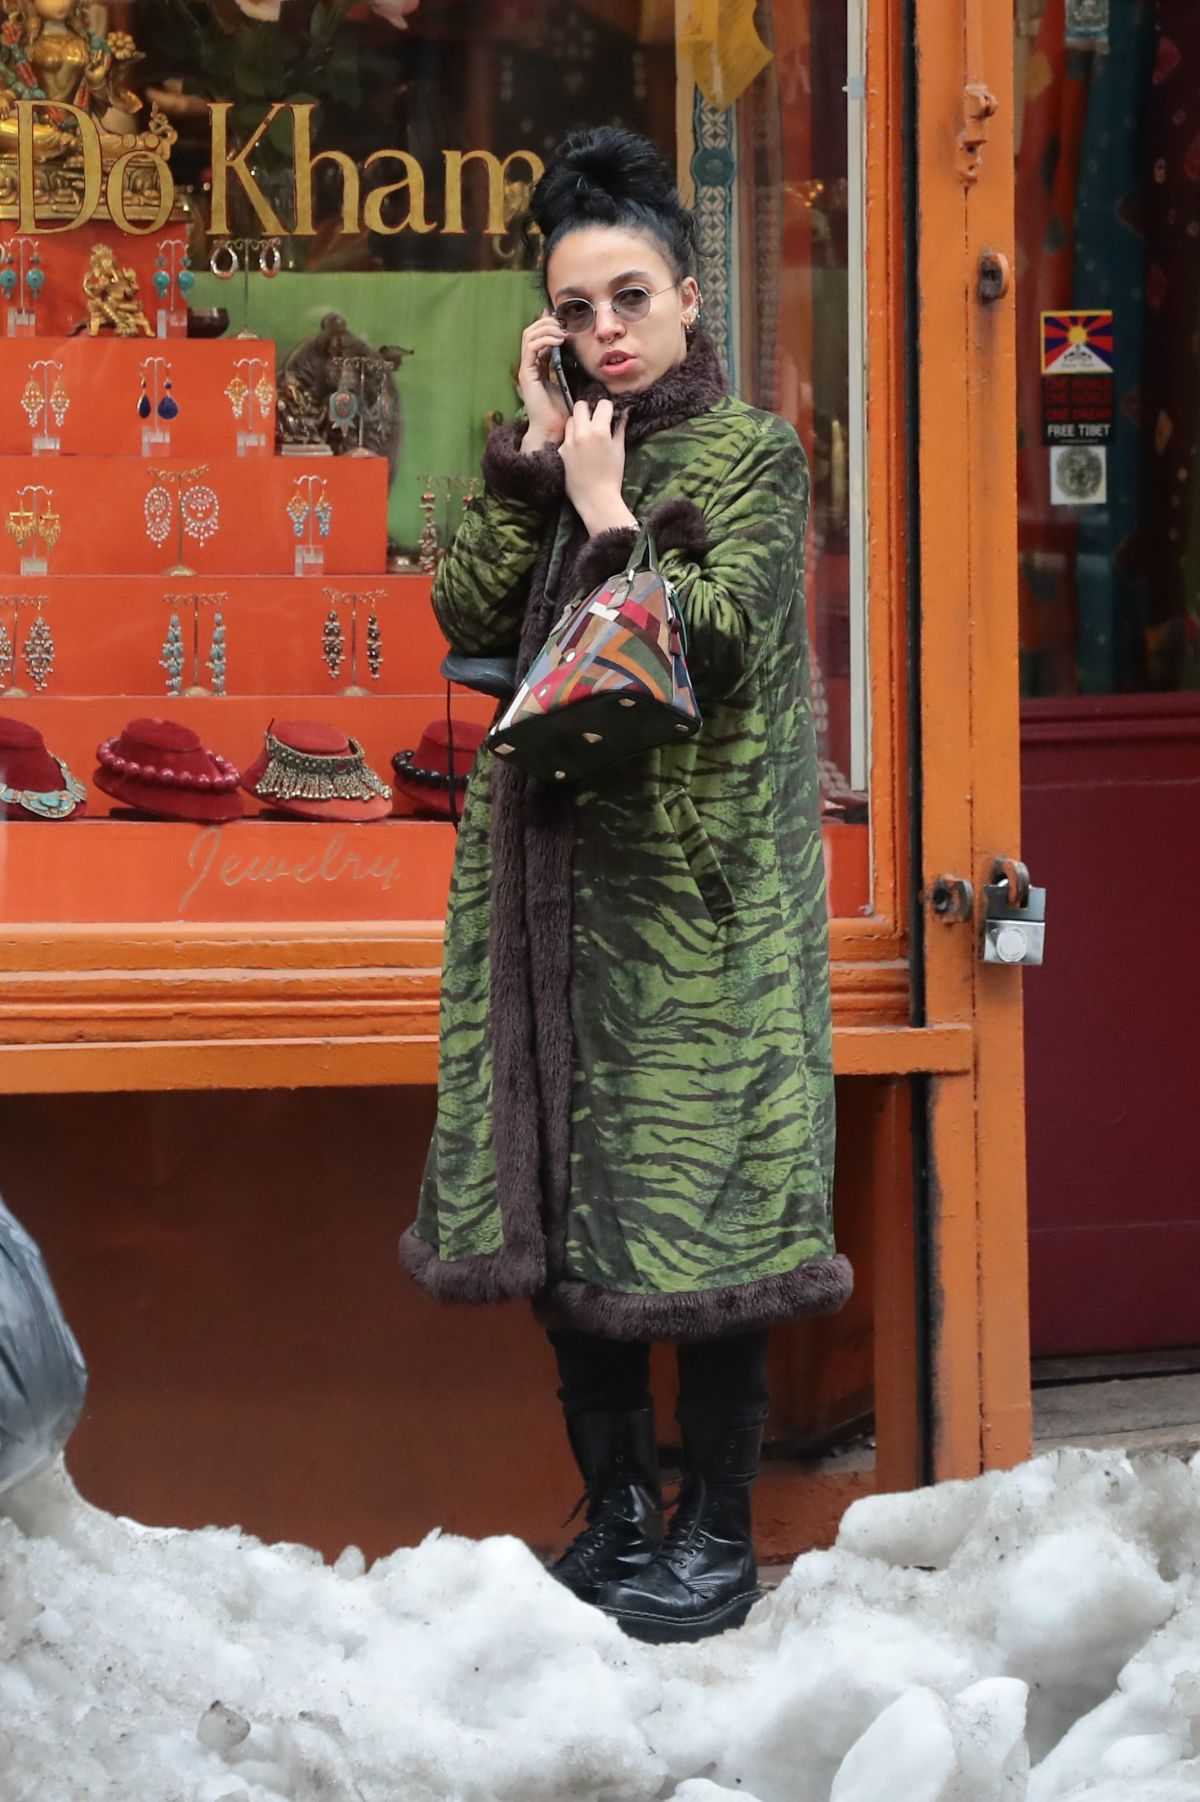 fka-twigs-out-shopping-in-soho-03-18-201